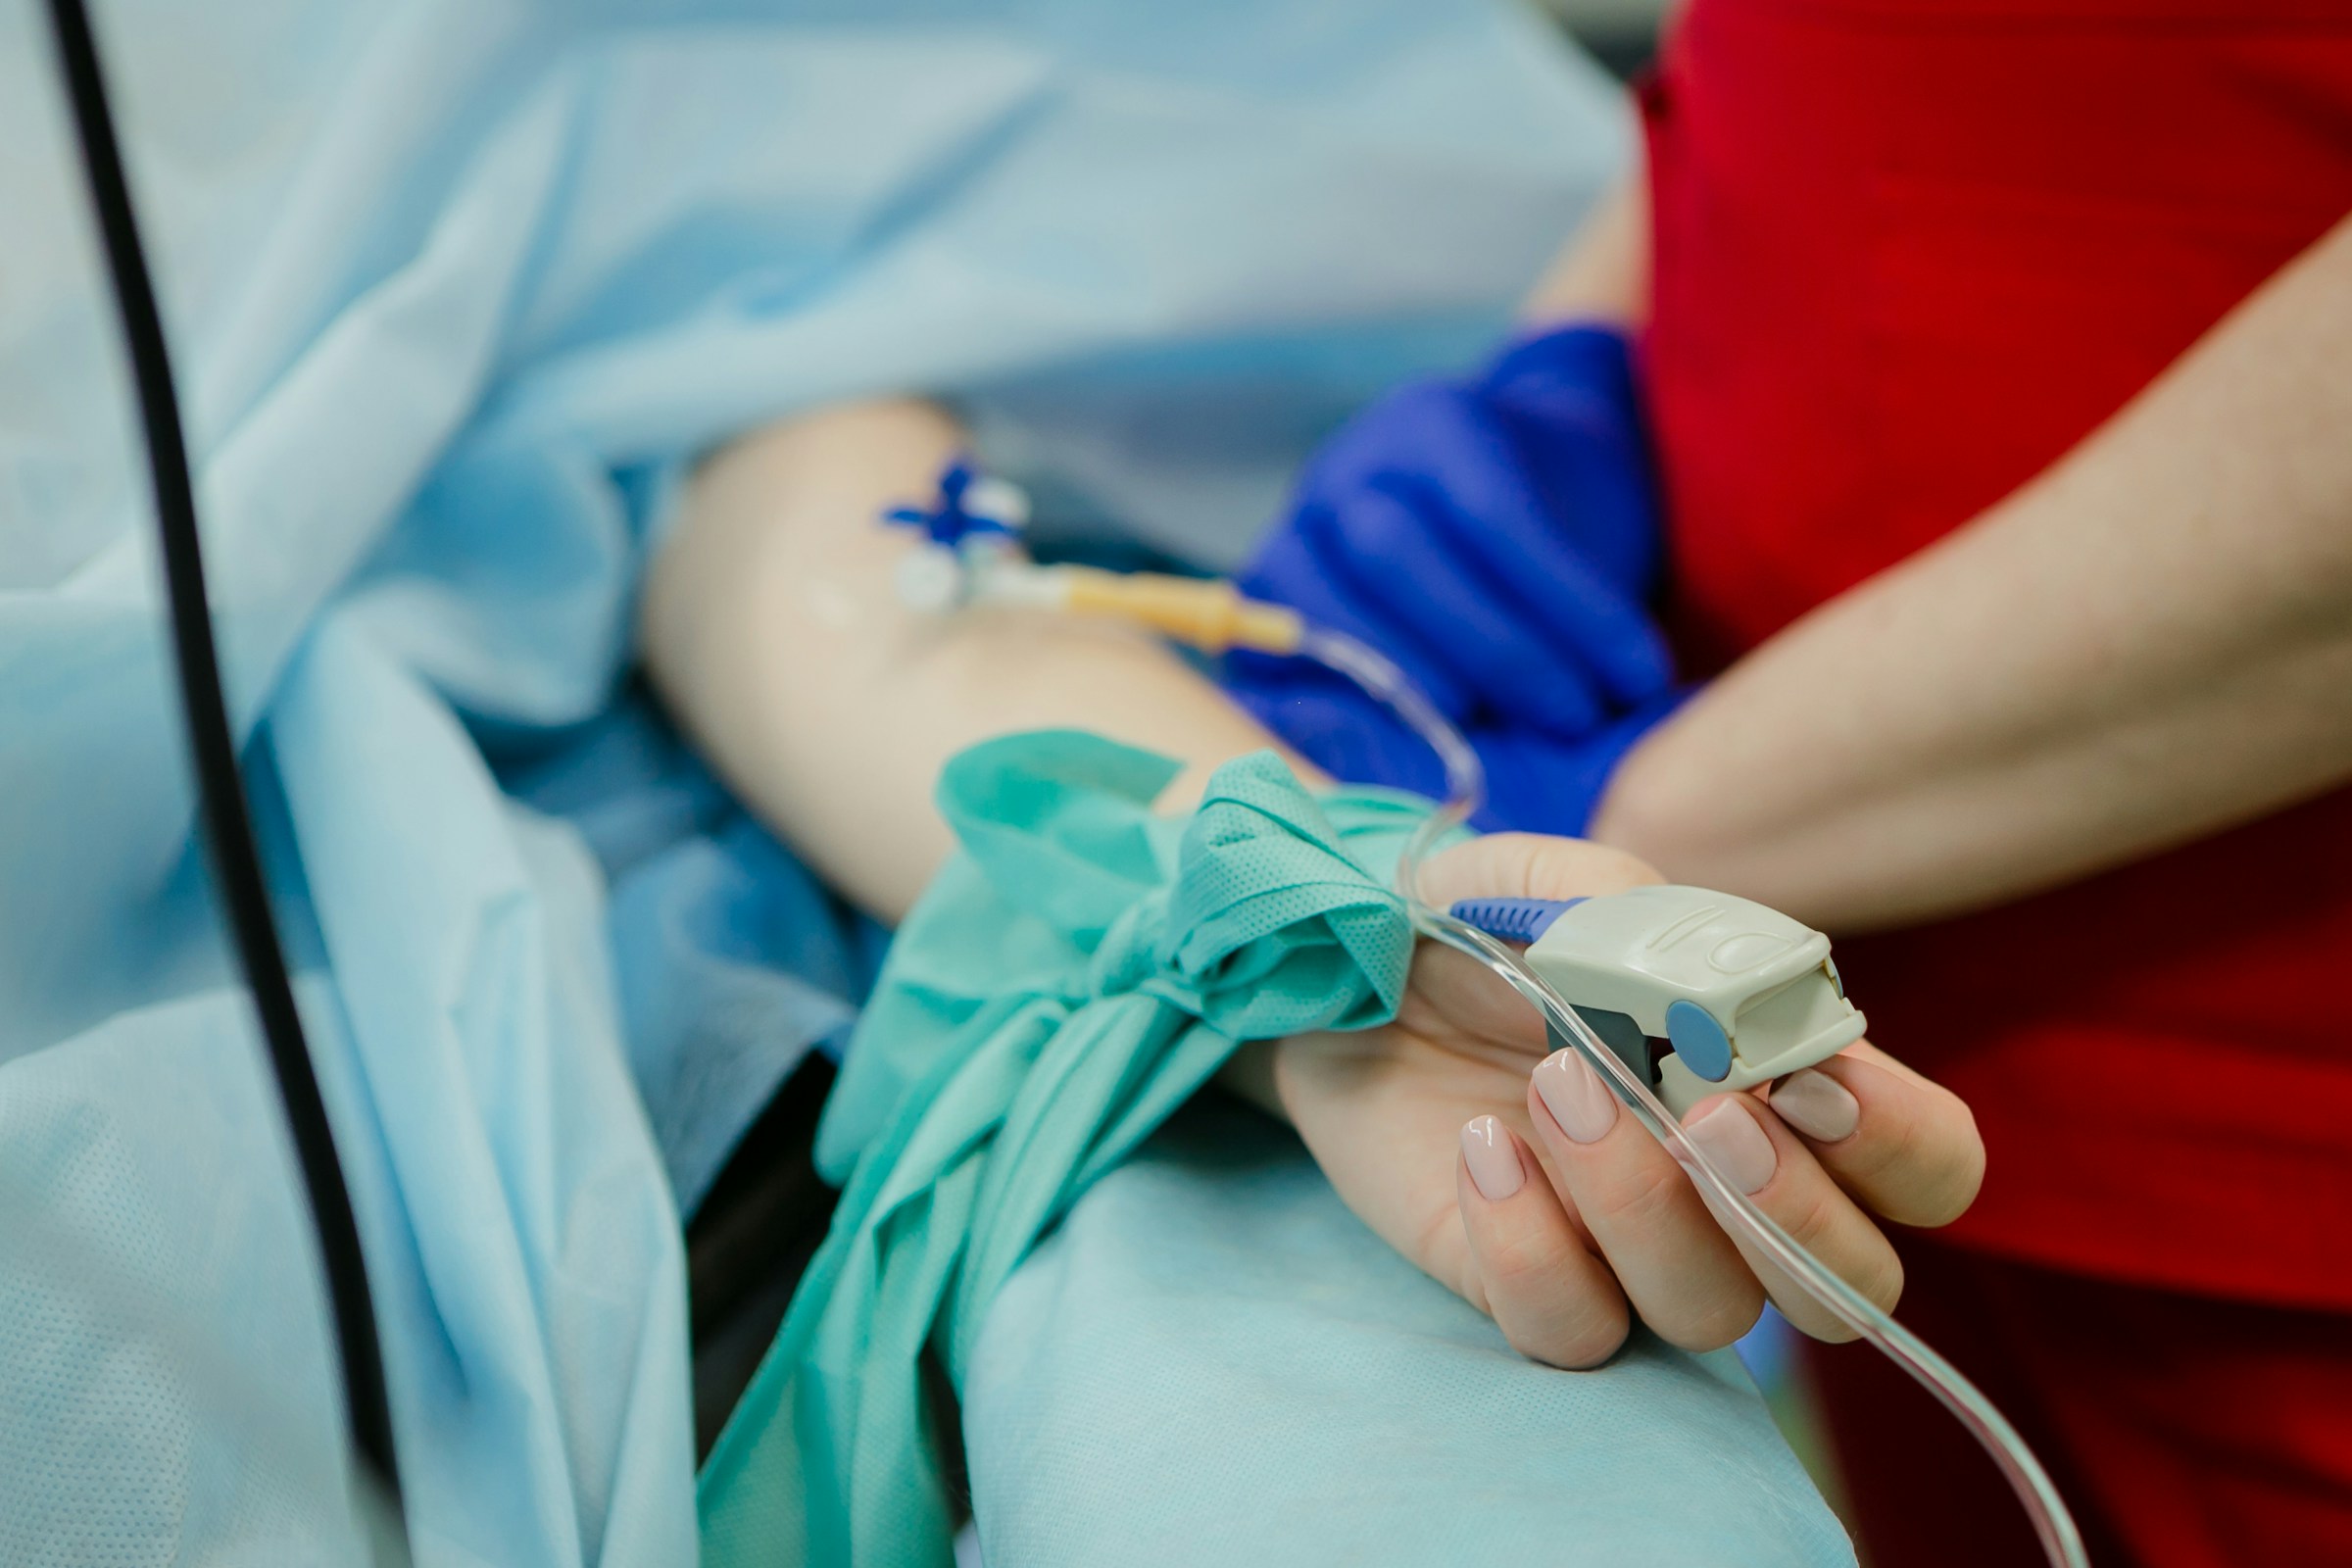 A person with an IV in hospital | Source: Unsplash